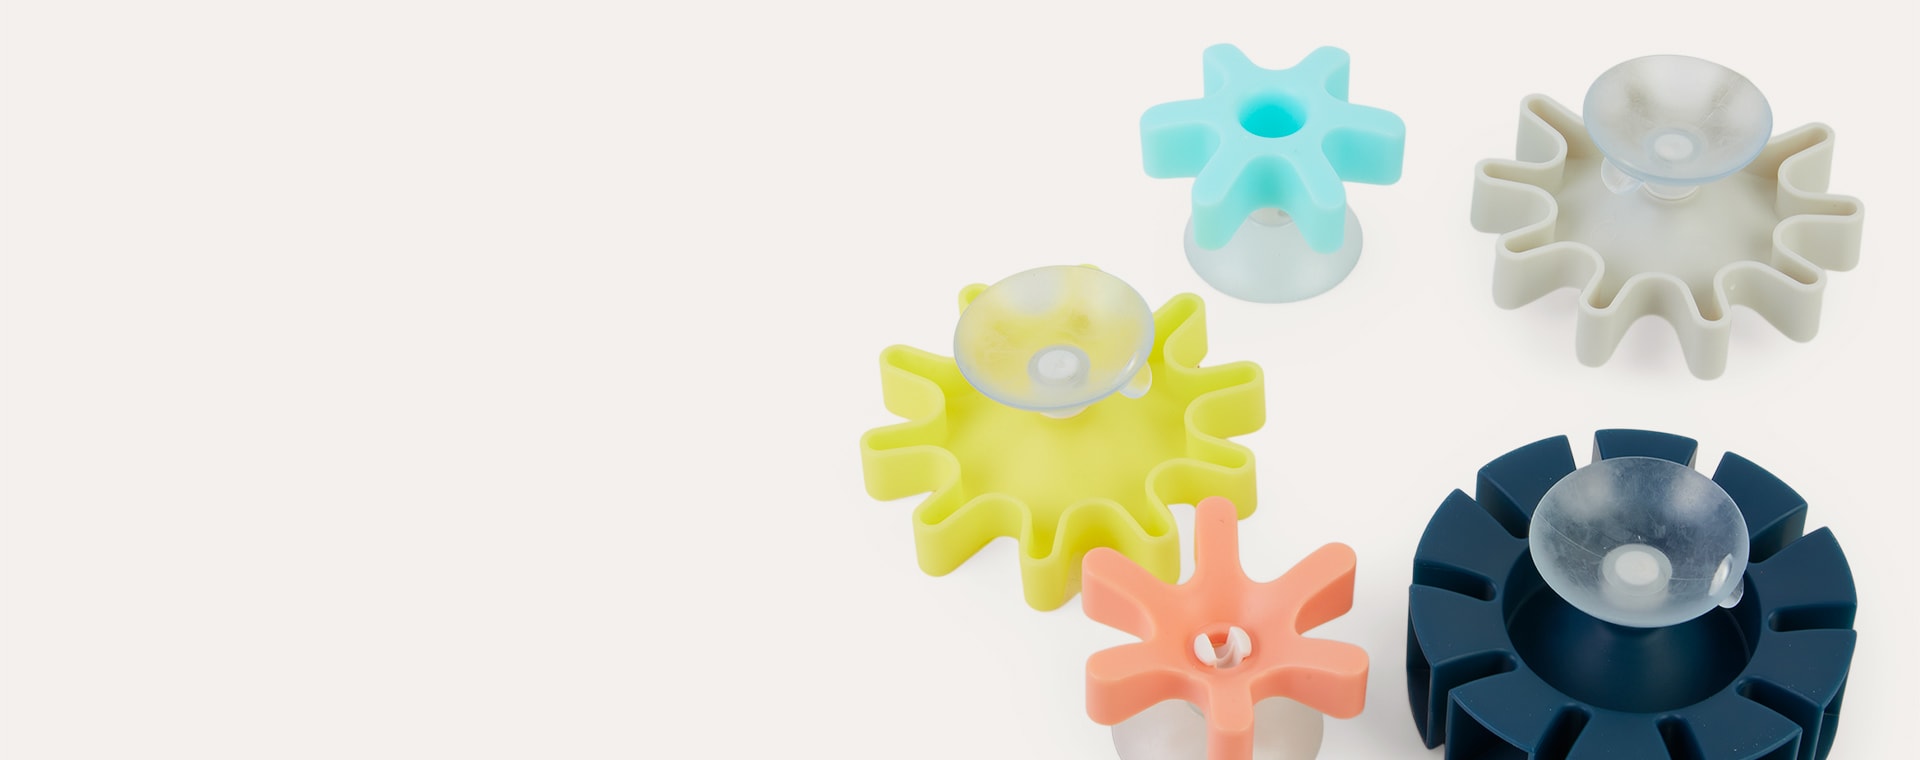 Blue Mix Boon Cogs Water Gears Bath Toy